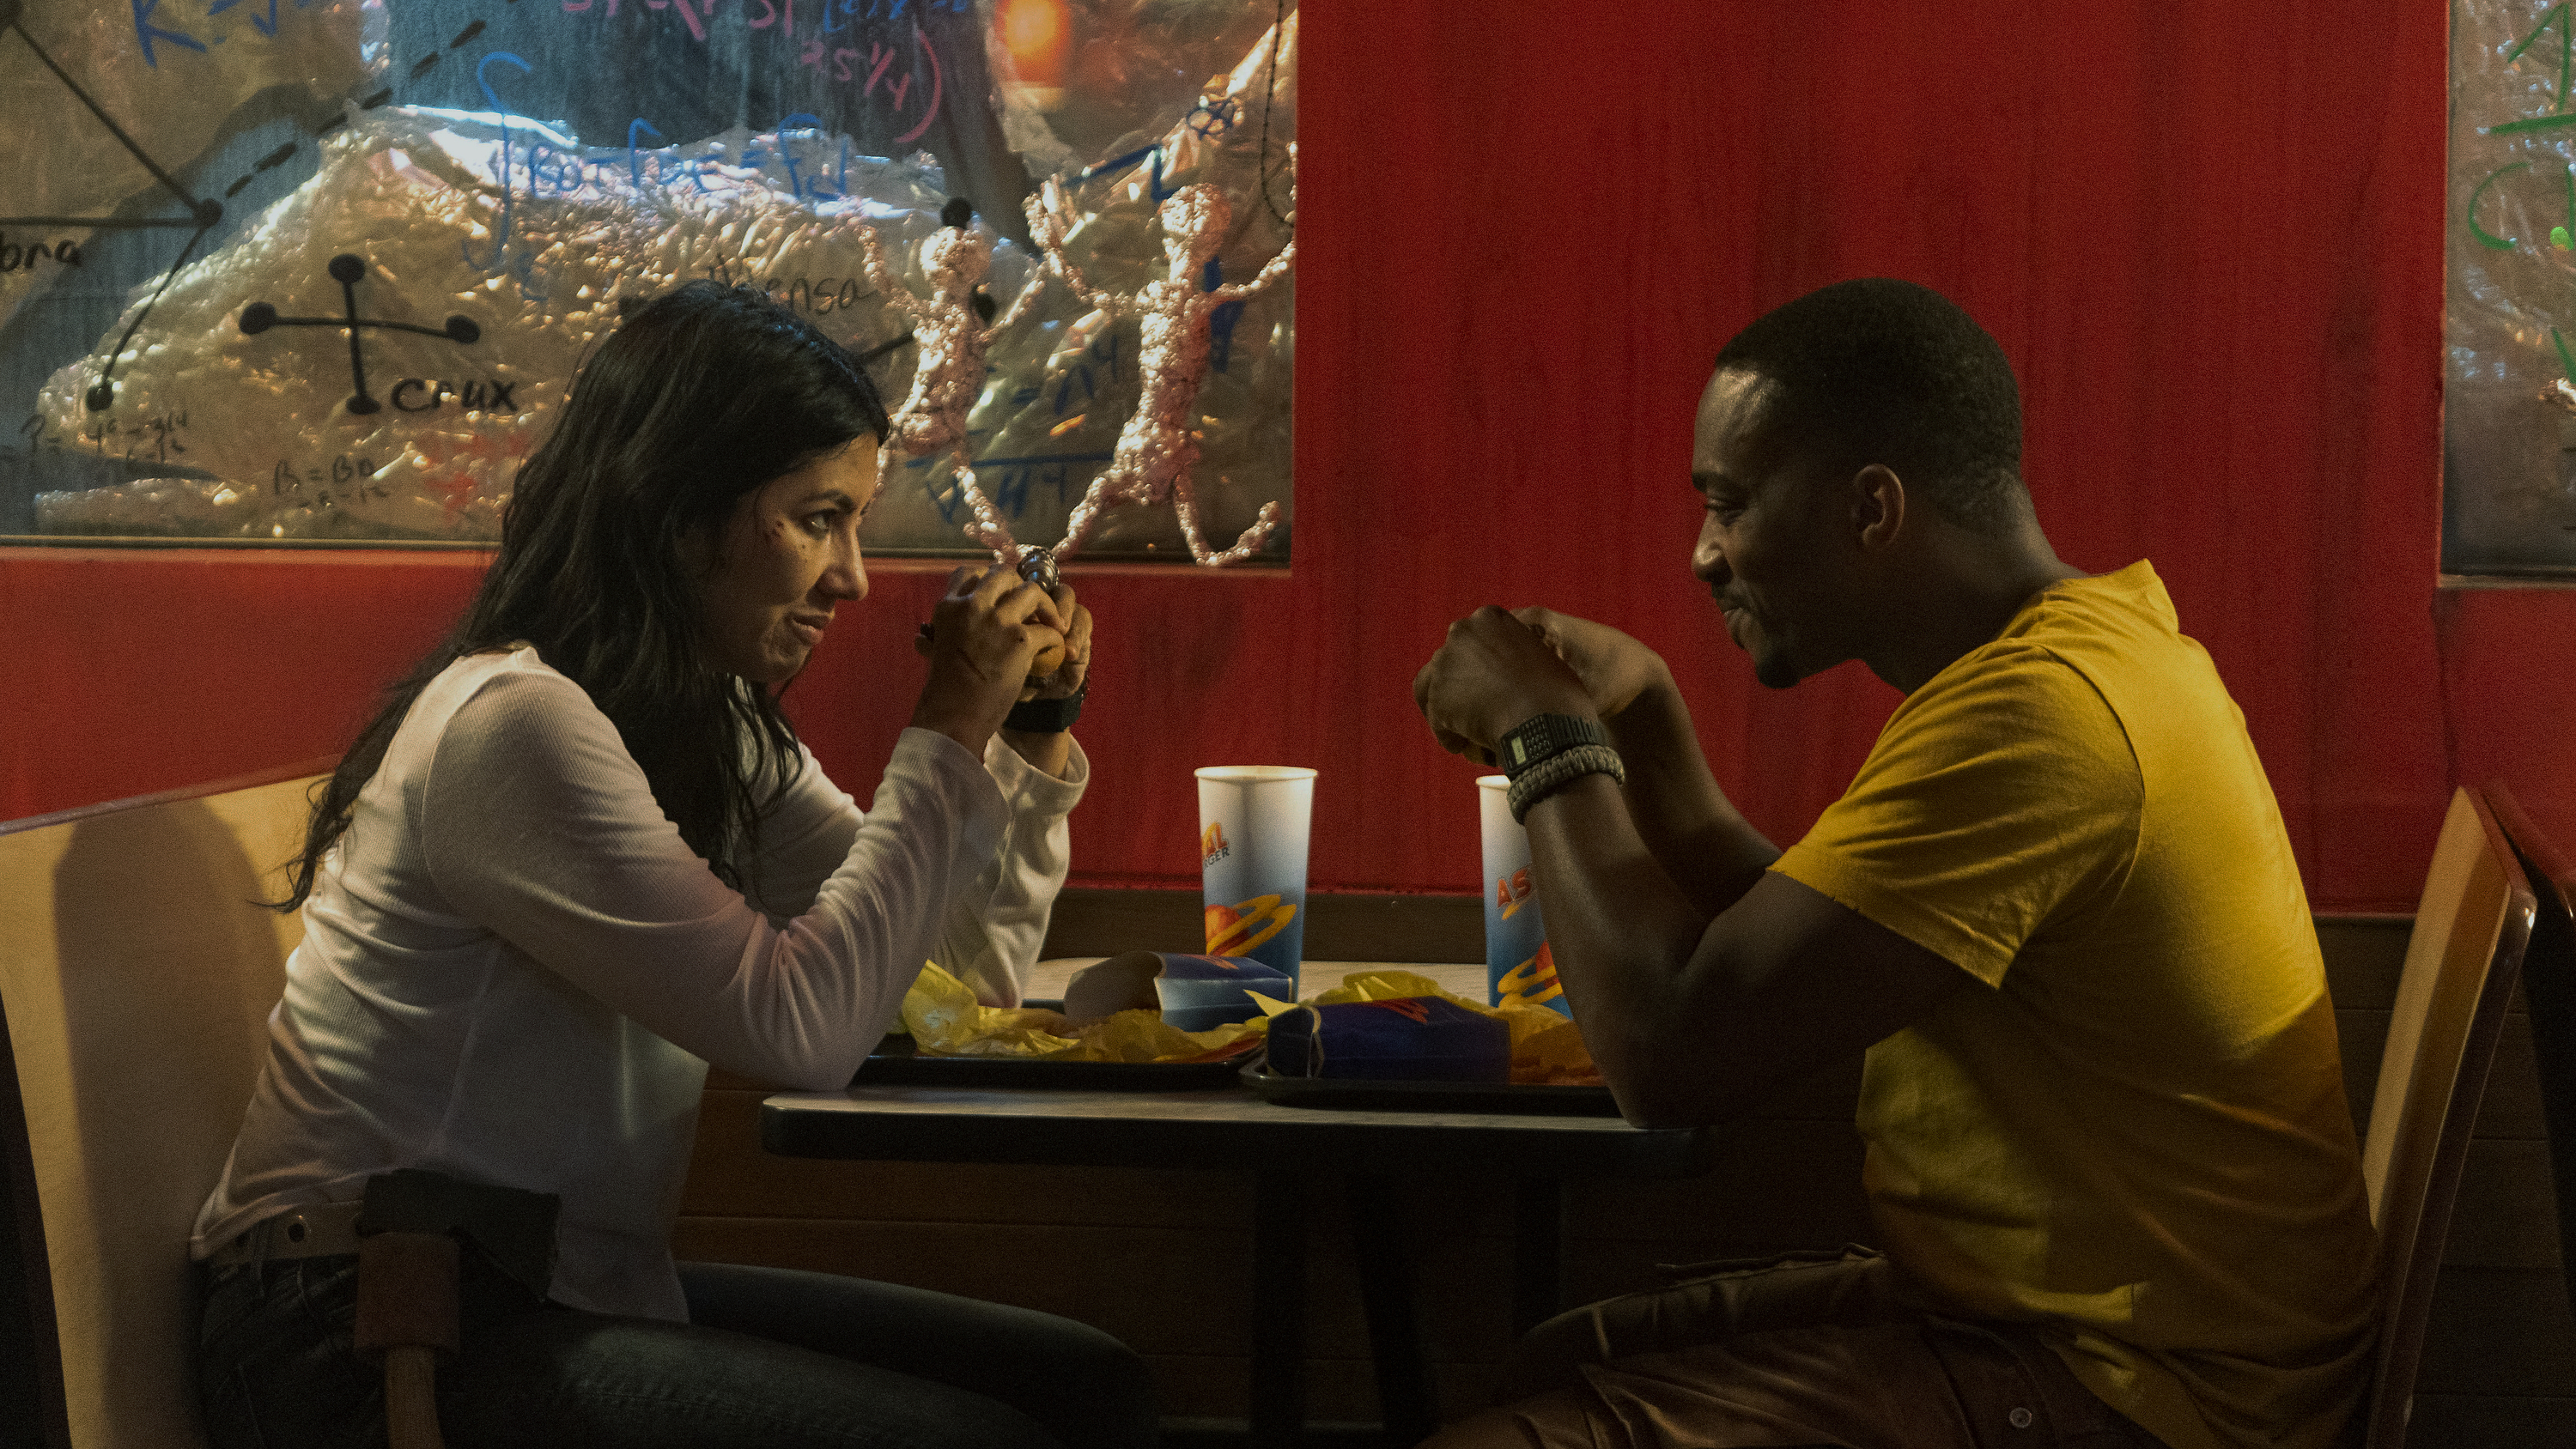 Two characters from a film sit at a diner table, sharing a meal and a conversation